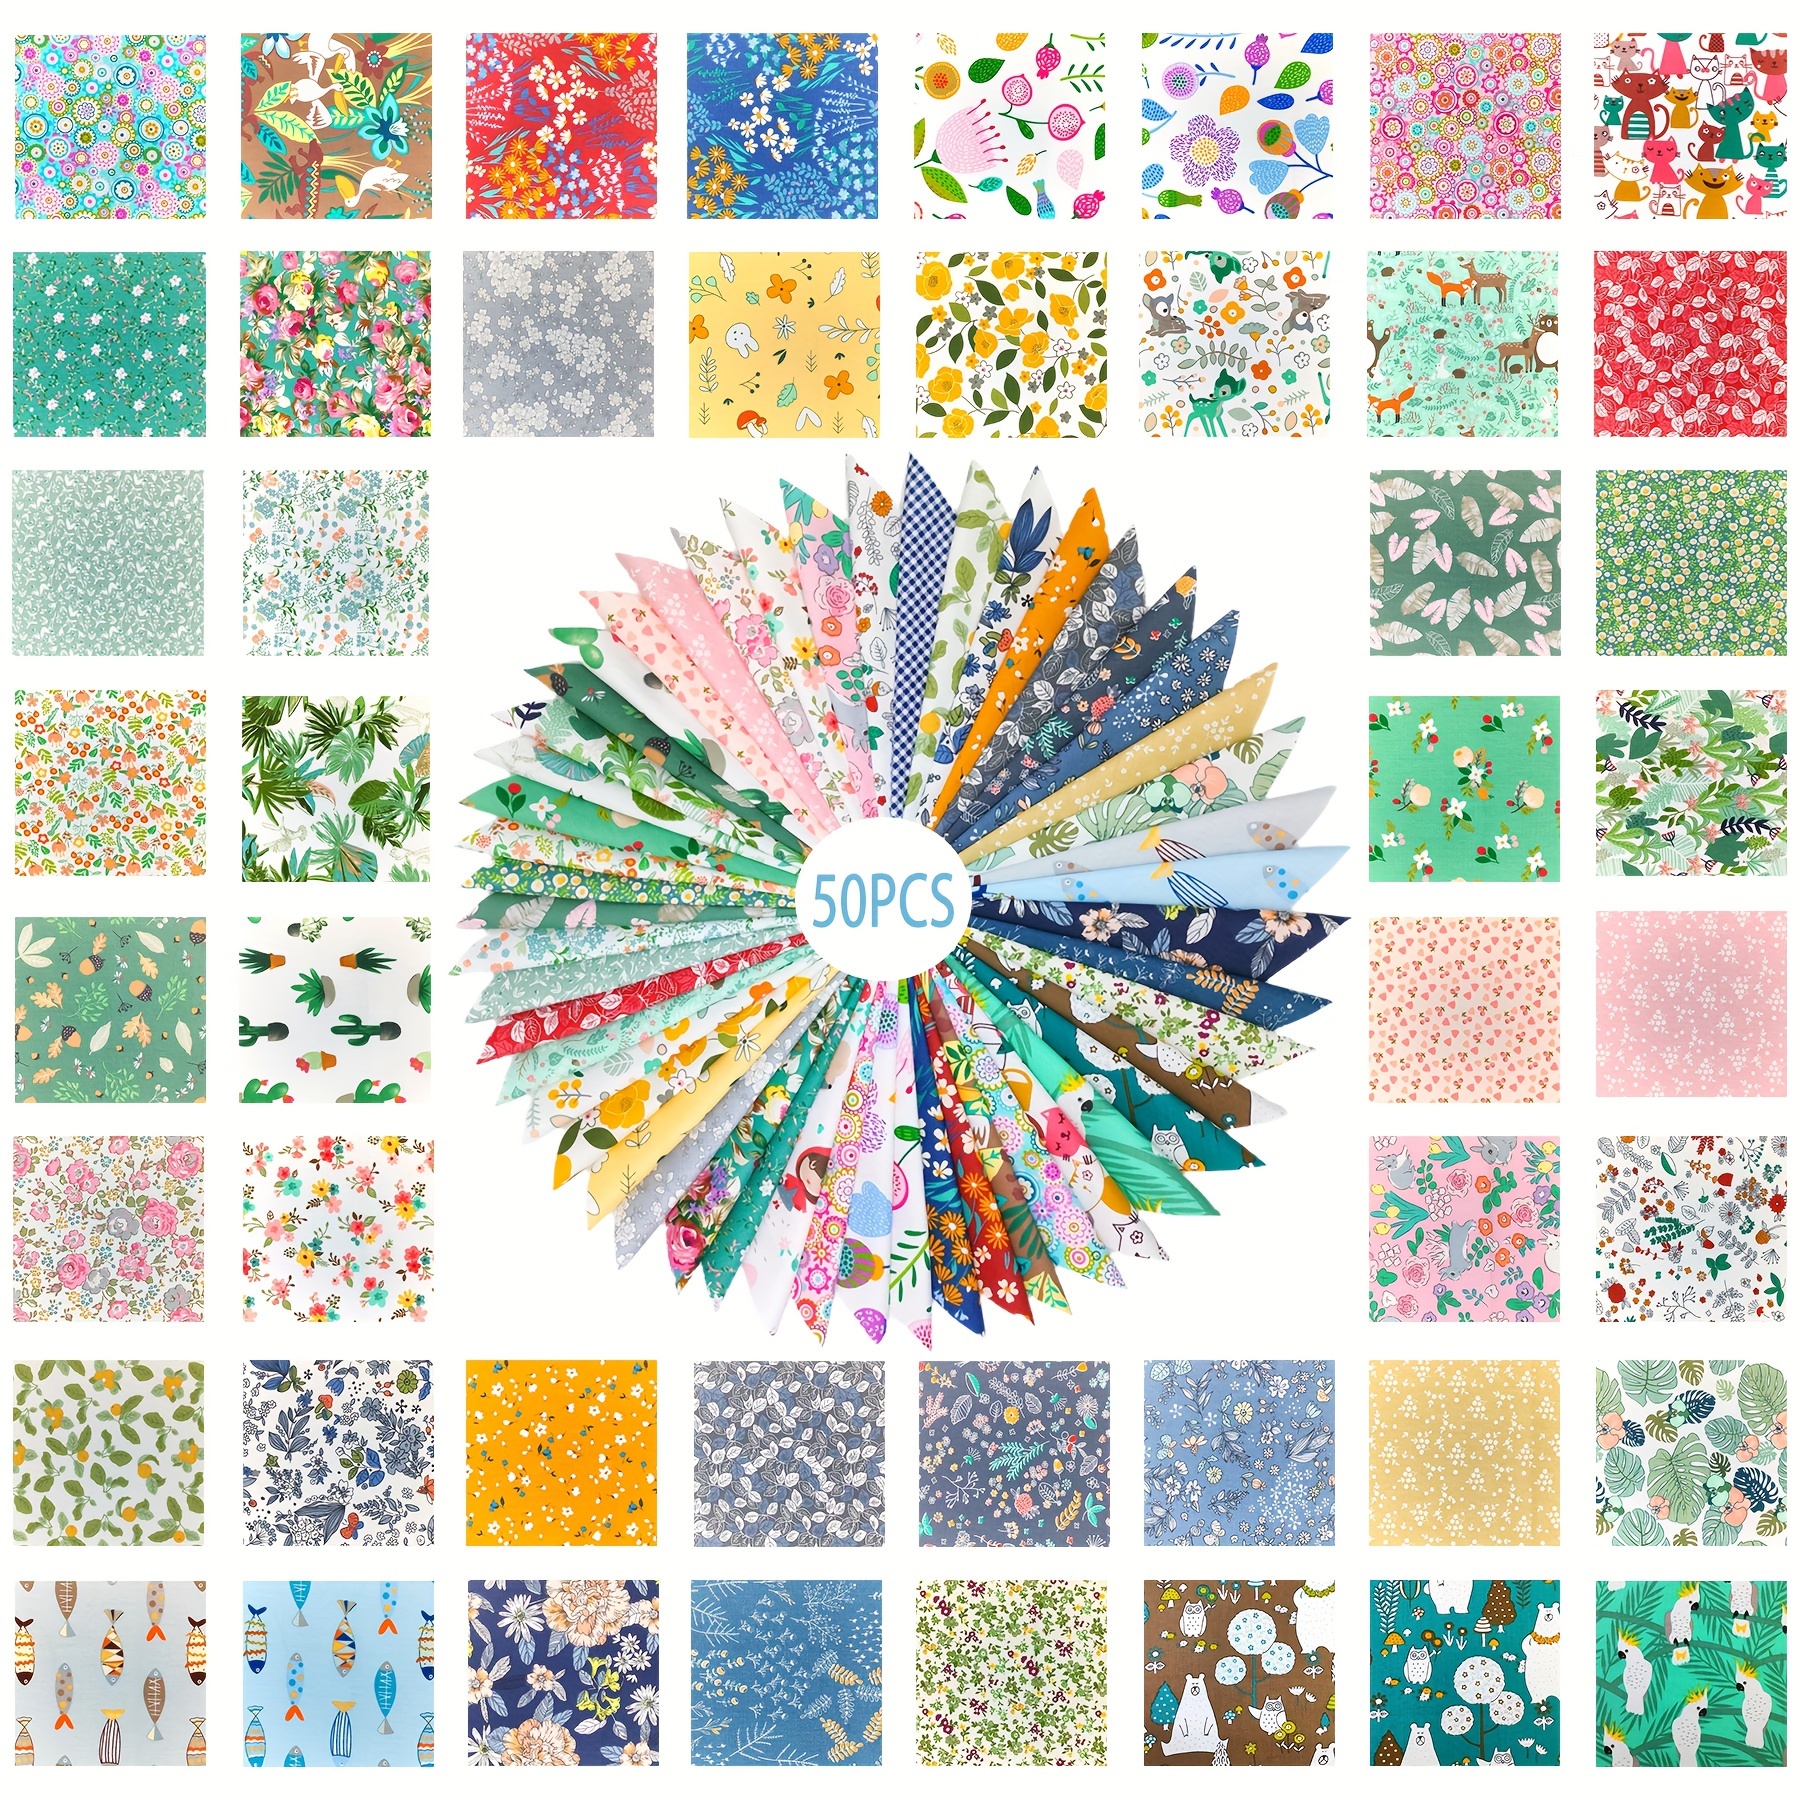 

50-piece Cotton Fabric Bundle - Pre-cut Flower Pattern Quilting Squares For Diy Patchwork, Doll Clothing, And Crafts, 100% Cotton Precuts, Hand Wash Only, Varied Designs, 3 Sizes Available